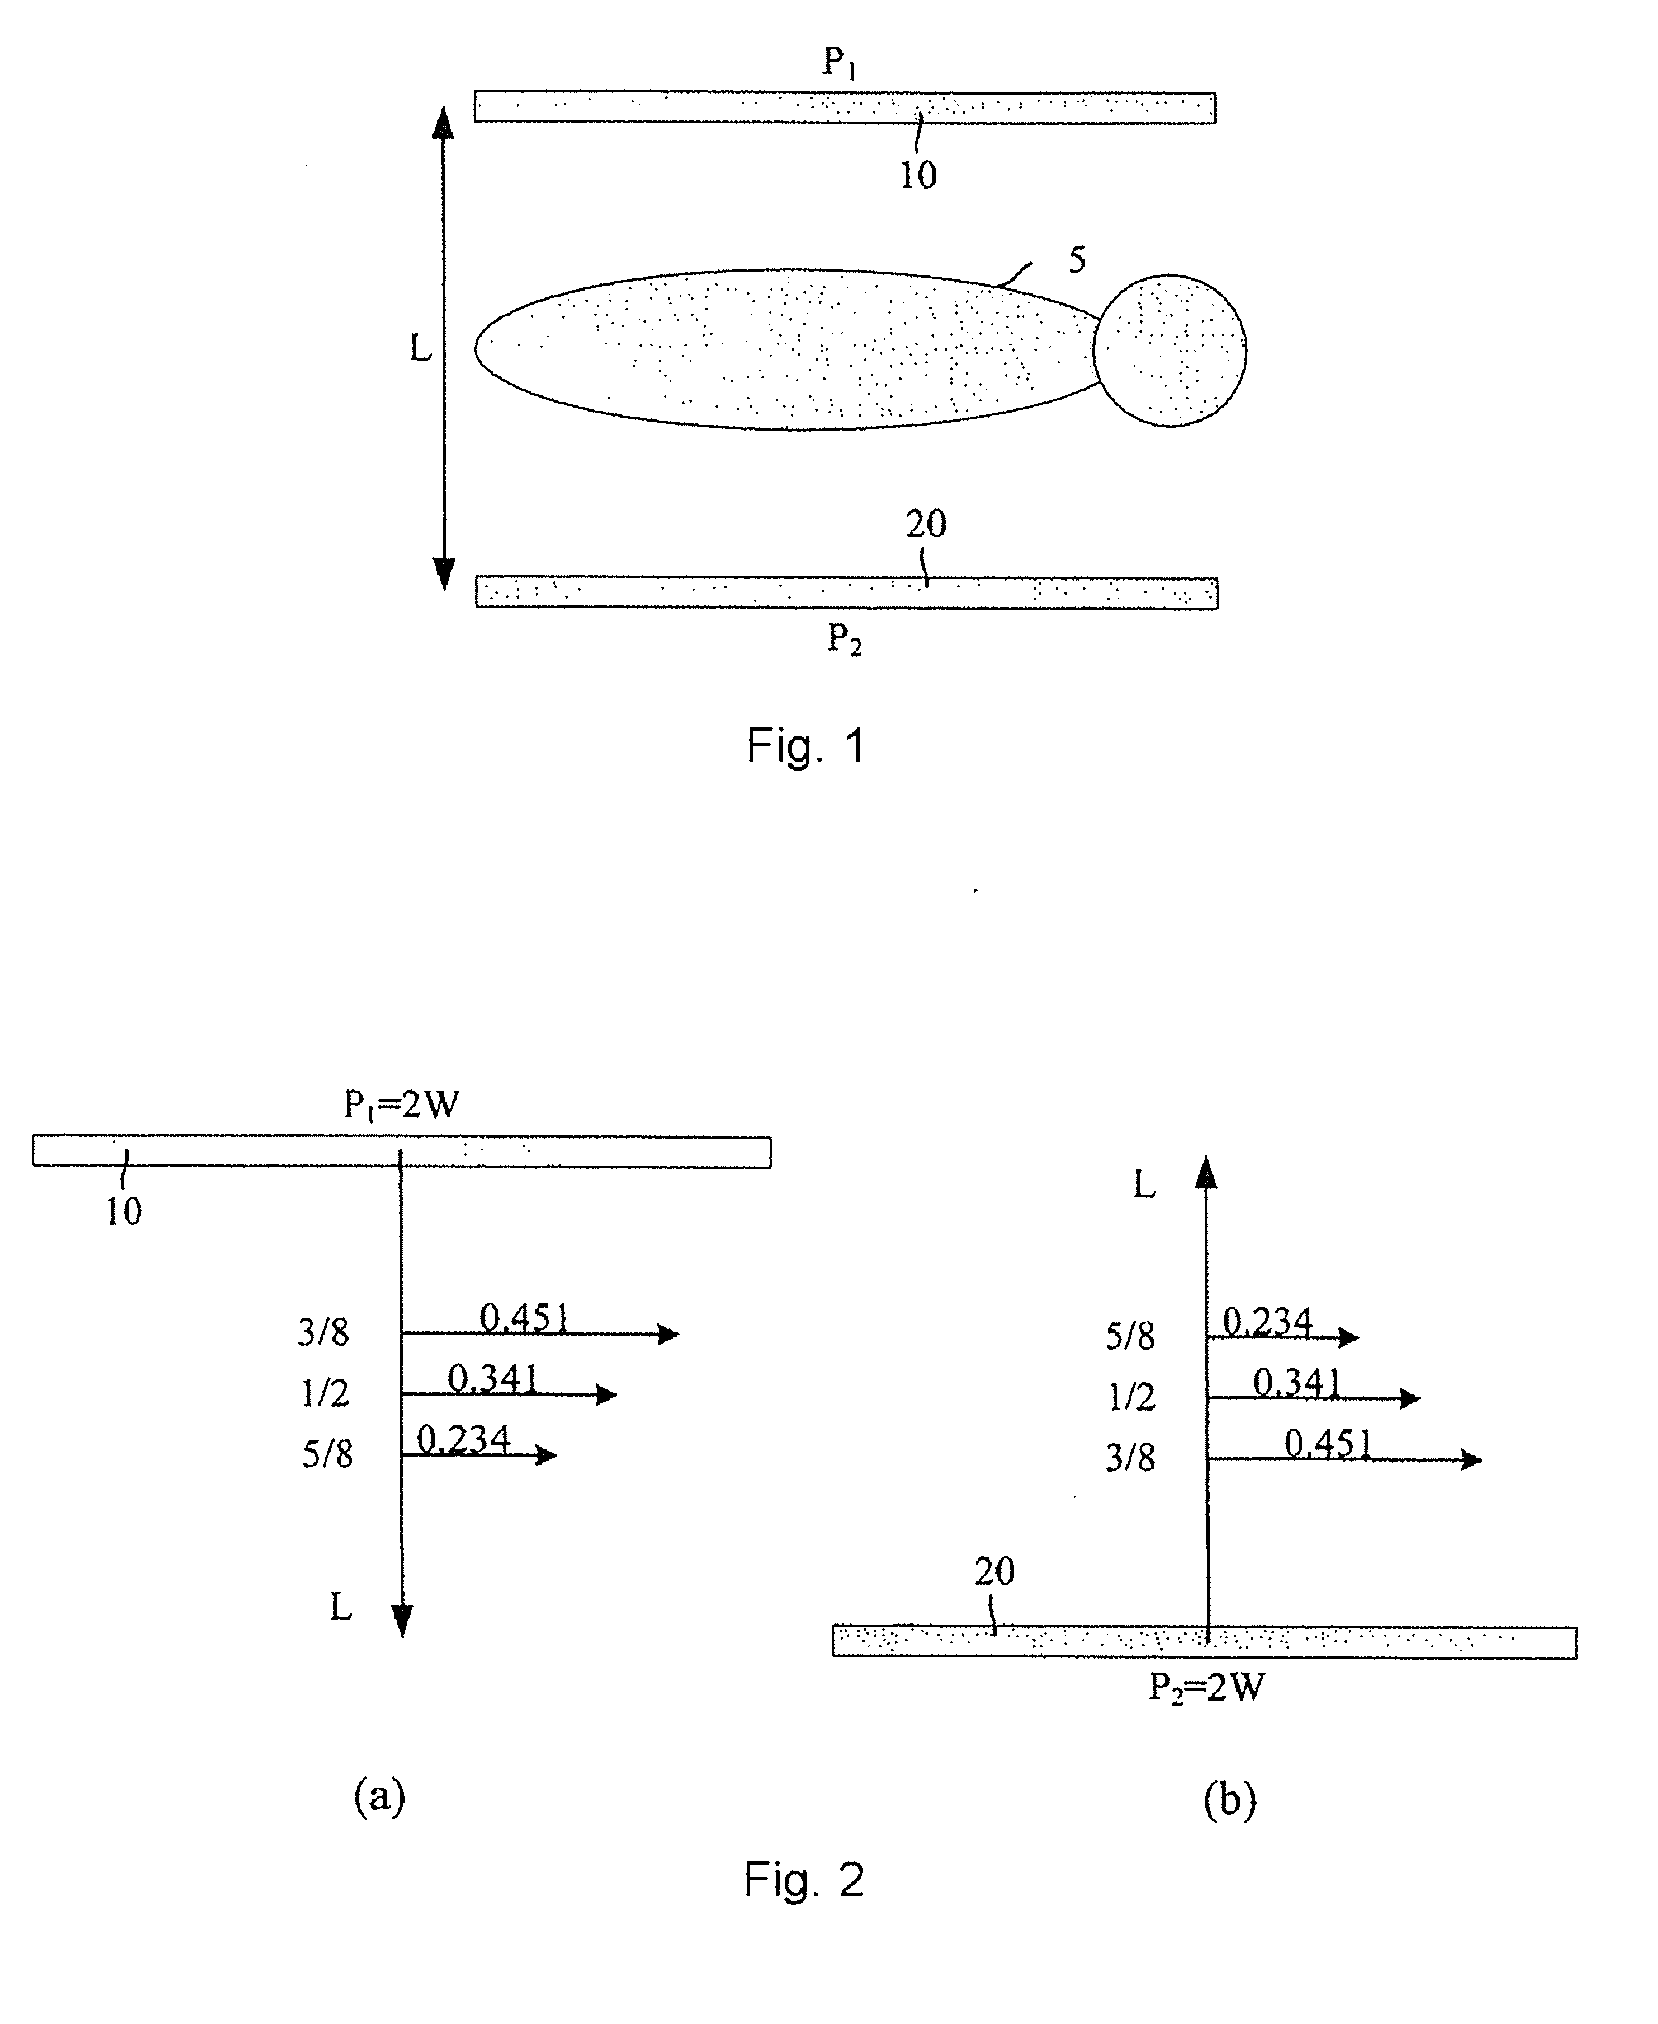 Body coil assembly and method for generating radio-frequency field using the body coil assembly